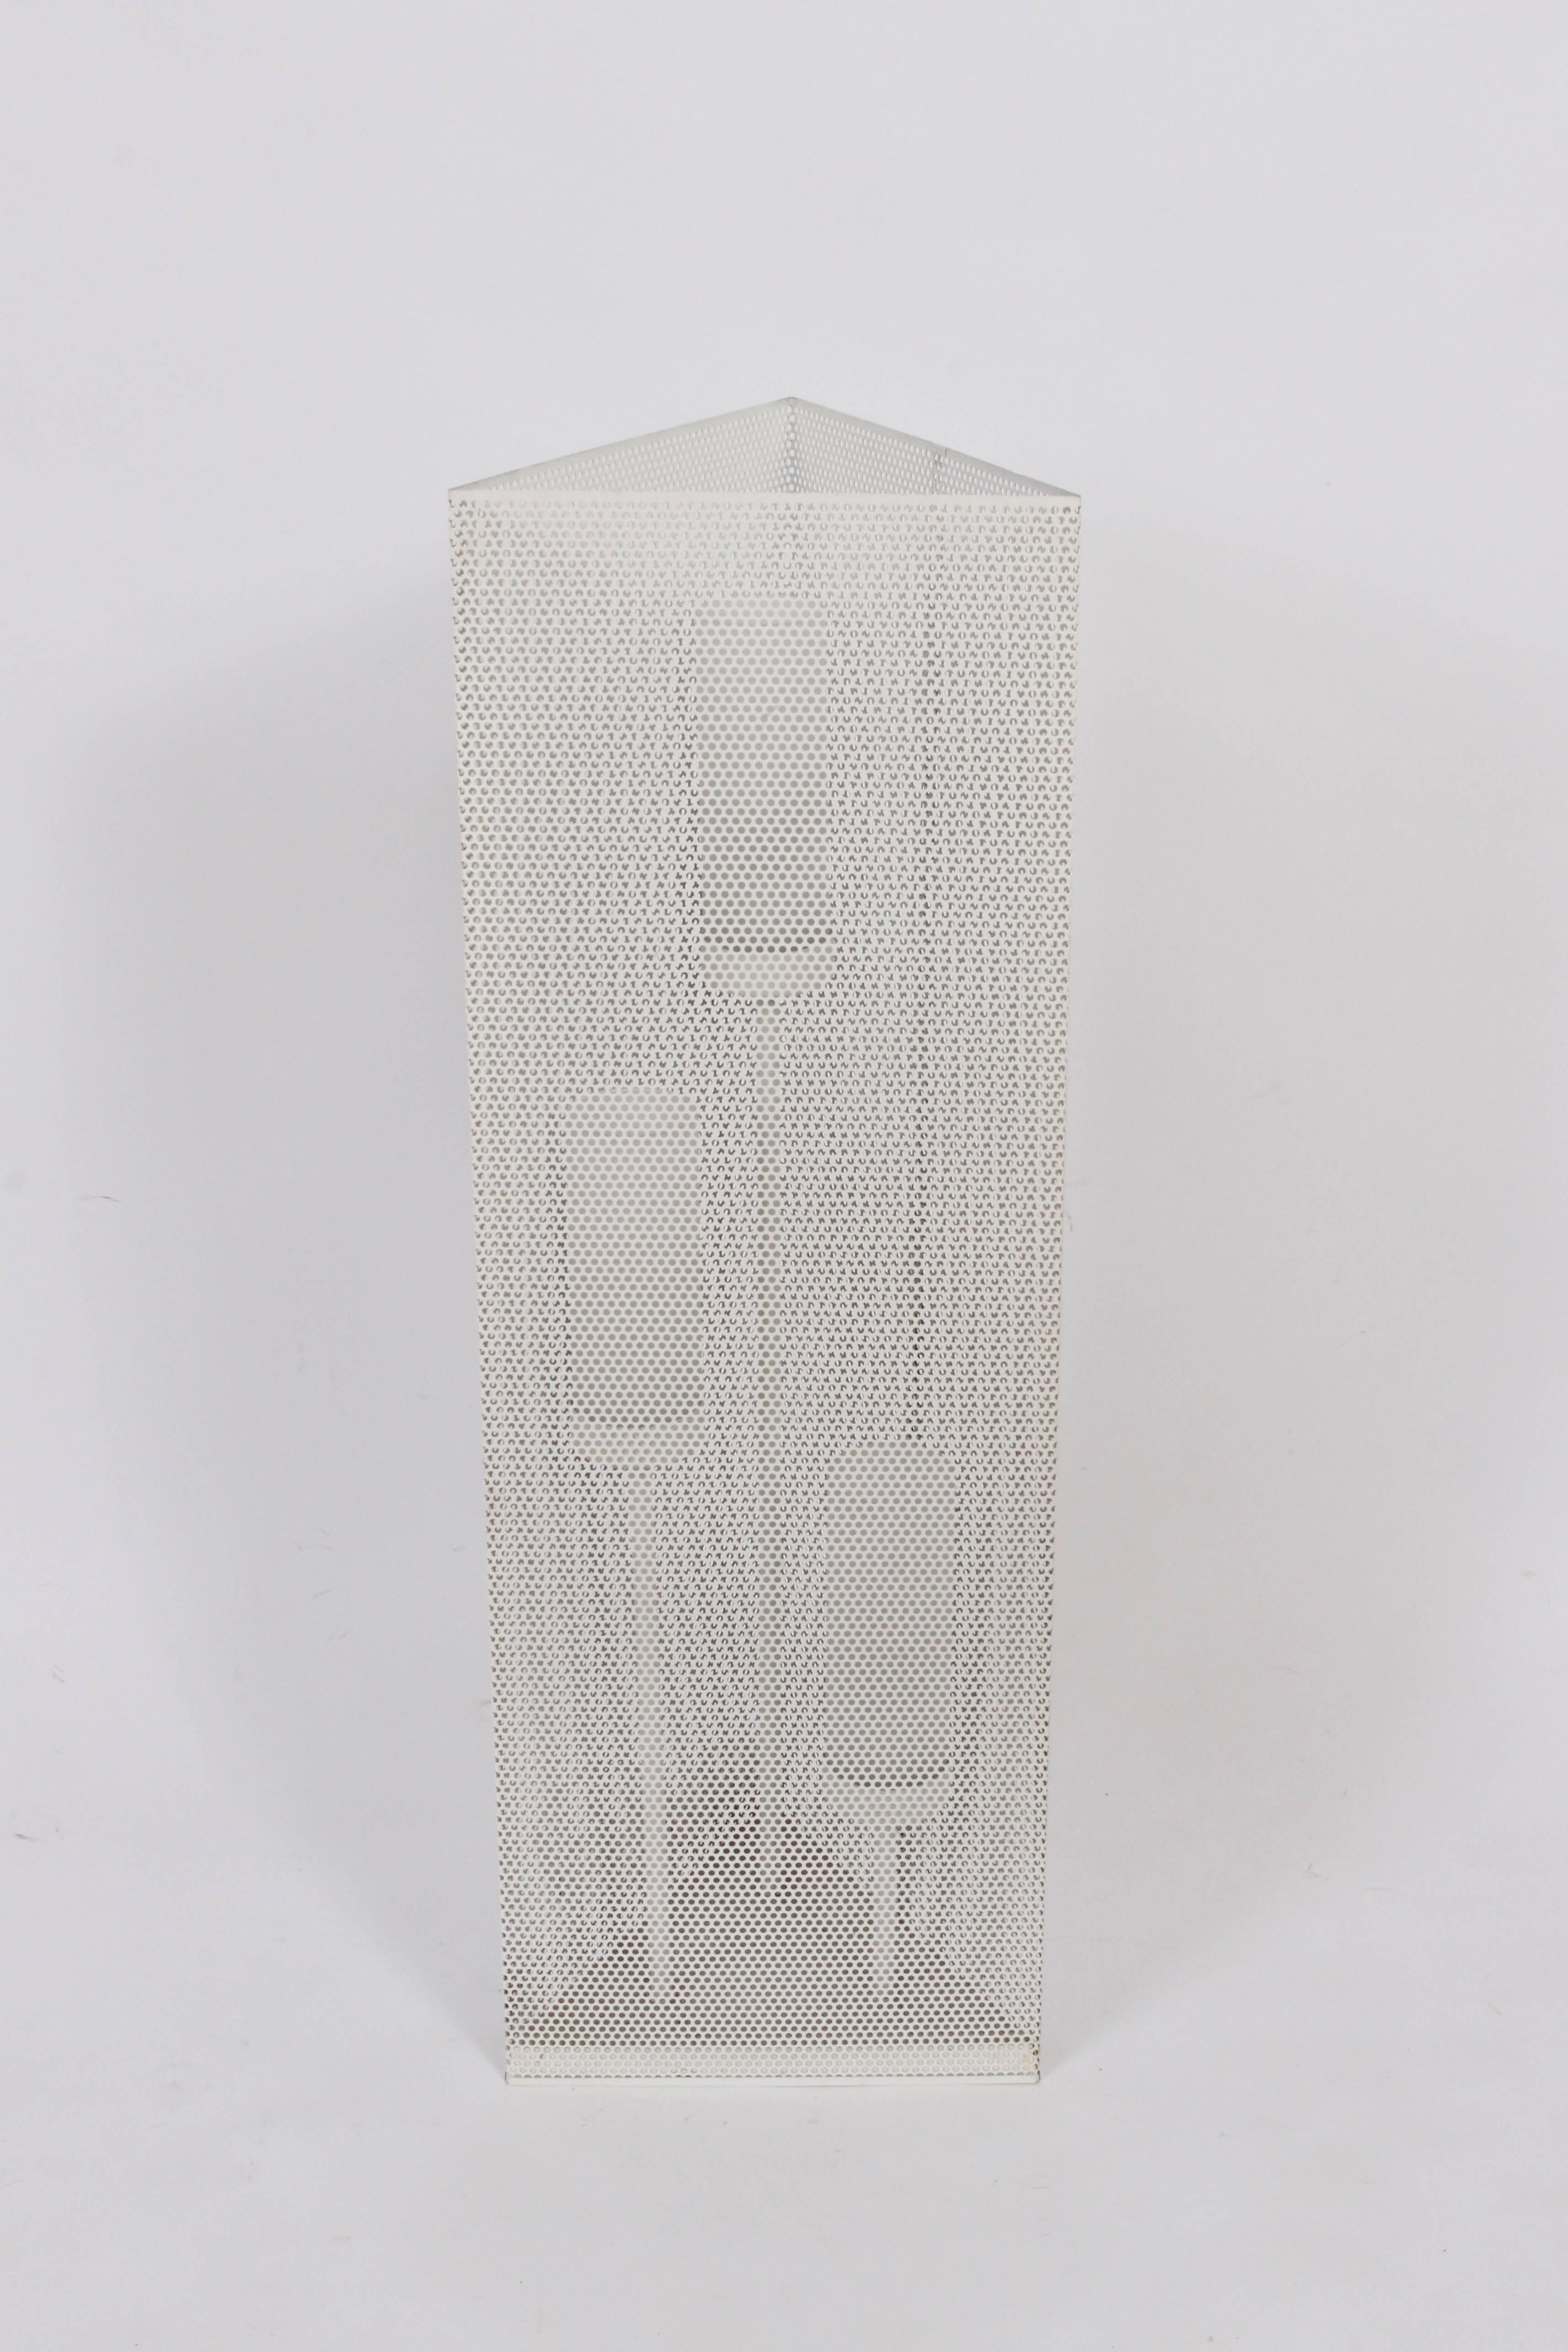 Minimalist, geometric, perforated White enamel Floor Lamp or Table Lamp, 1960s. Featuring a versatile and architectural white enameled metal triangular form with geometric perforations and three ascending white frosted glass candle like cylinder